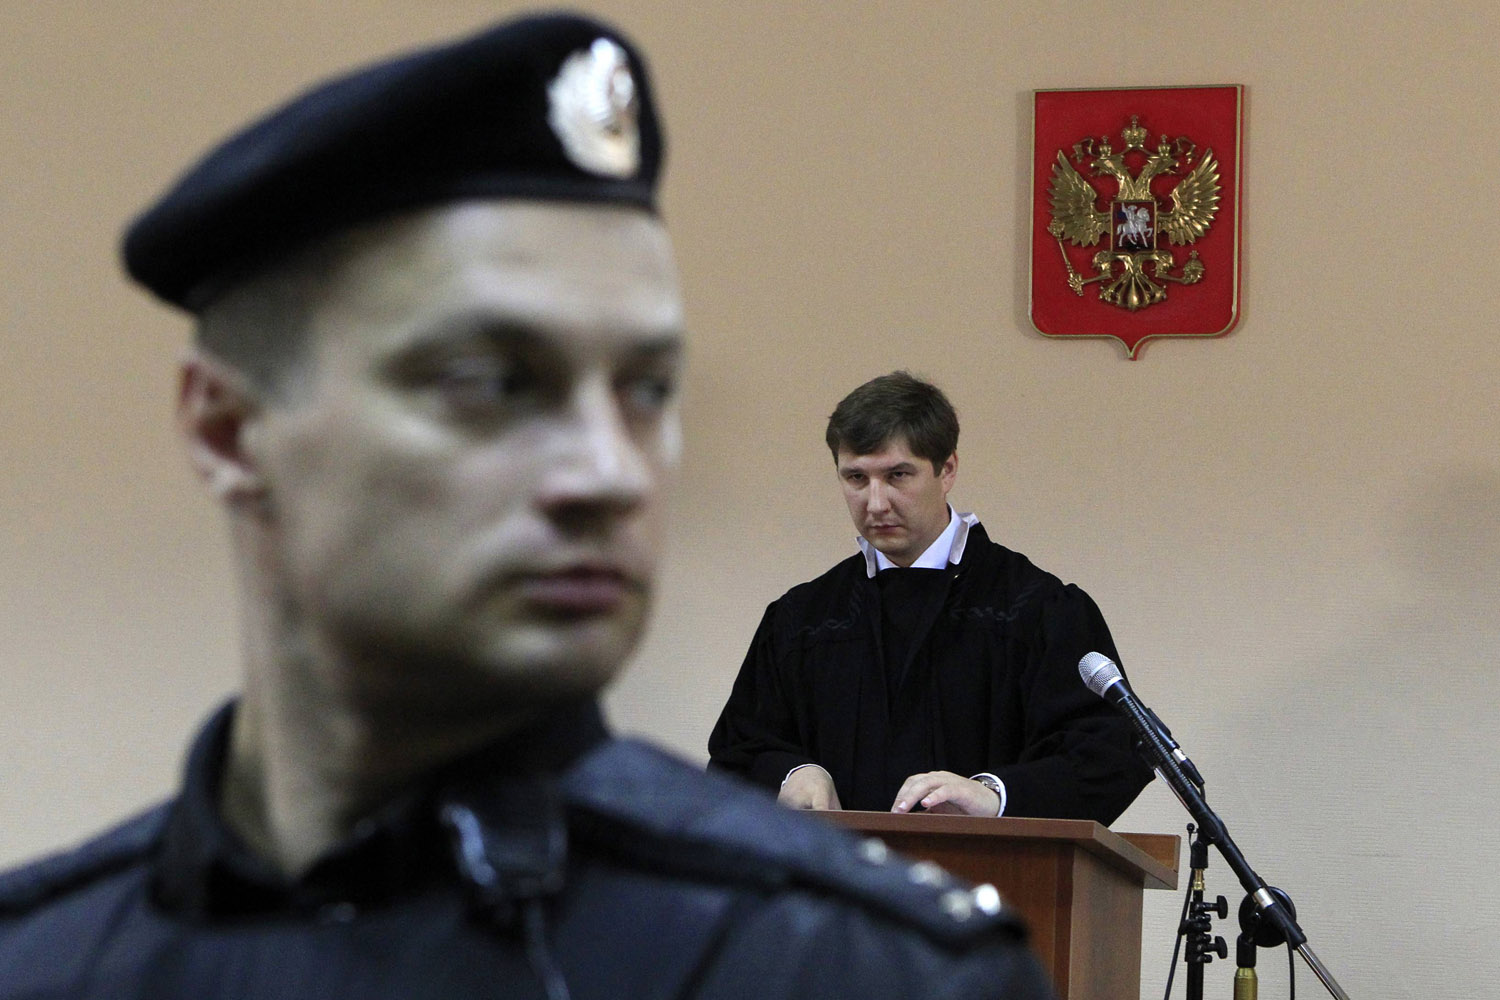 July 18, 2013. Judge Sergei Blinov (back) reads the verdict during the hearing of the Alexei Navalny trial in Kirov, Russia.